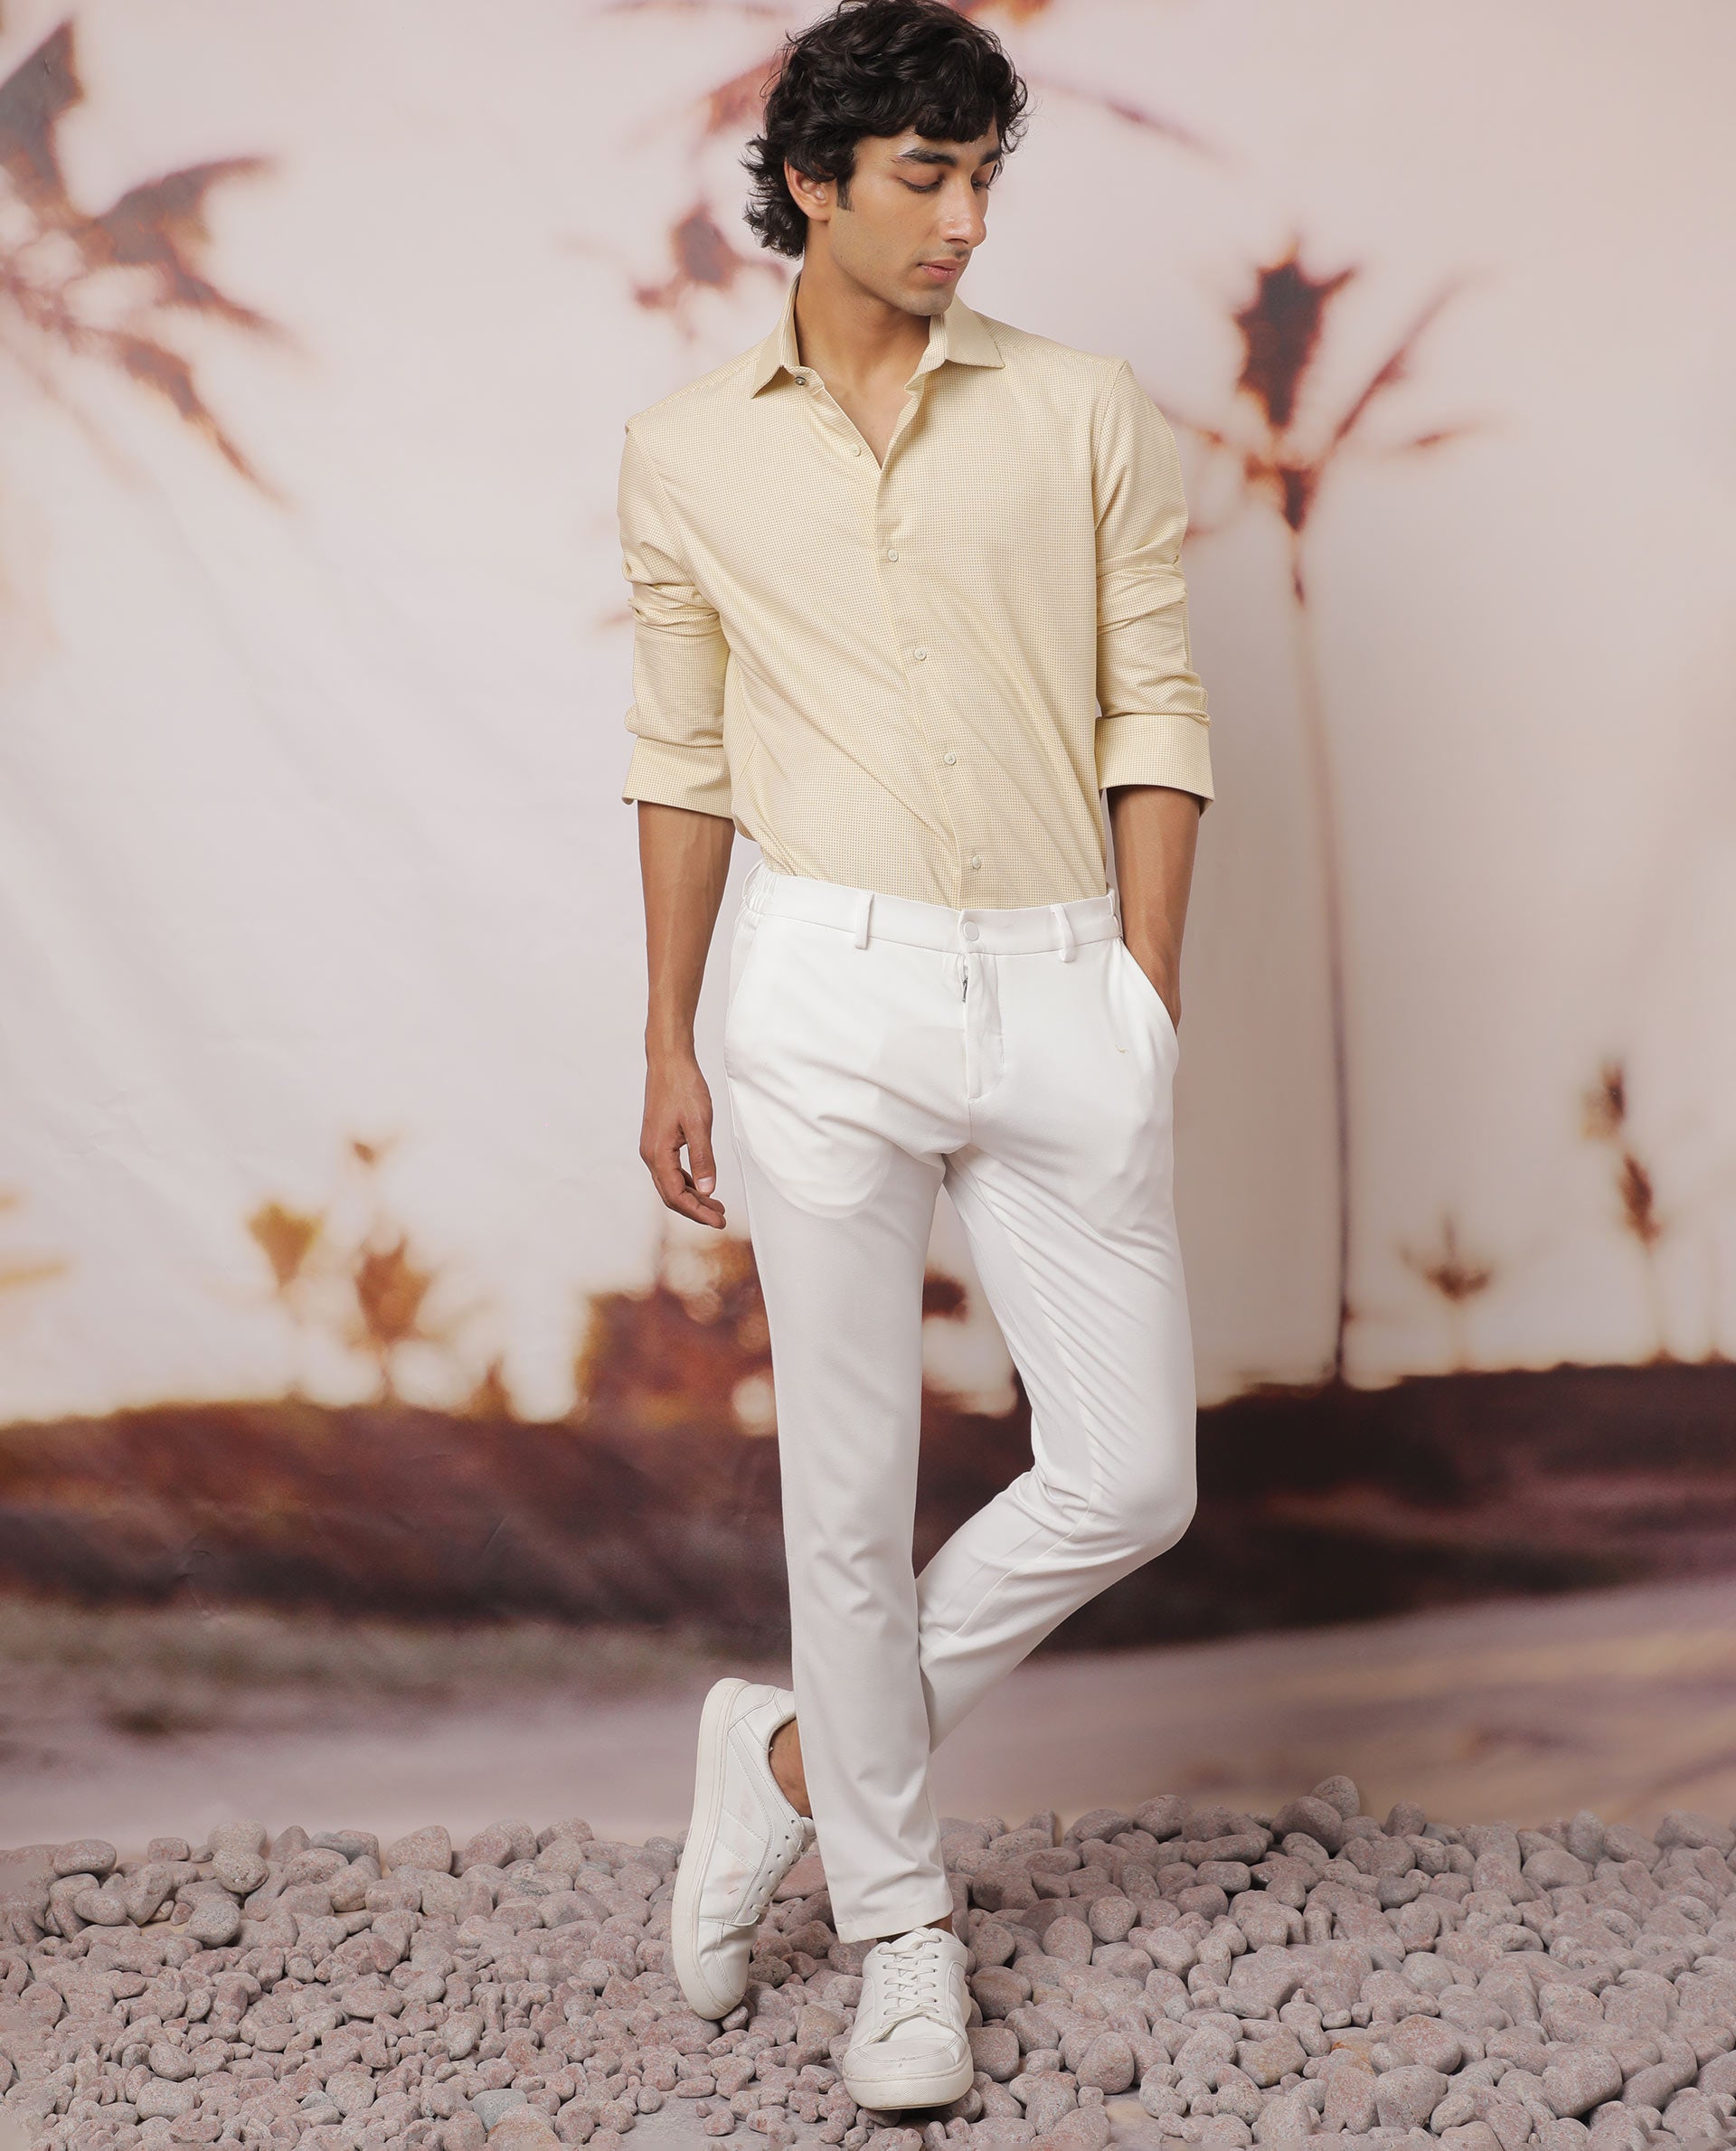 White Shoes with Tan Pants Outfits For Men After 50 59 ideas  outfits   Lookastic